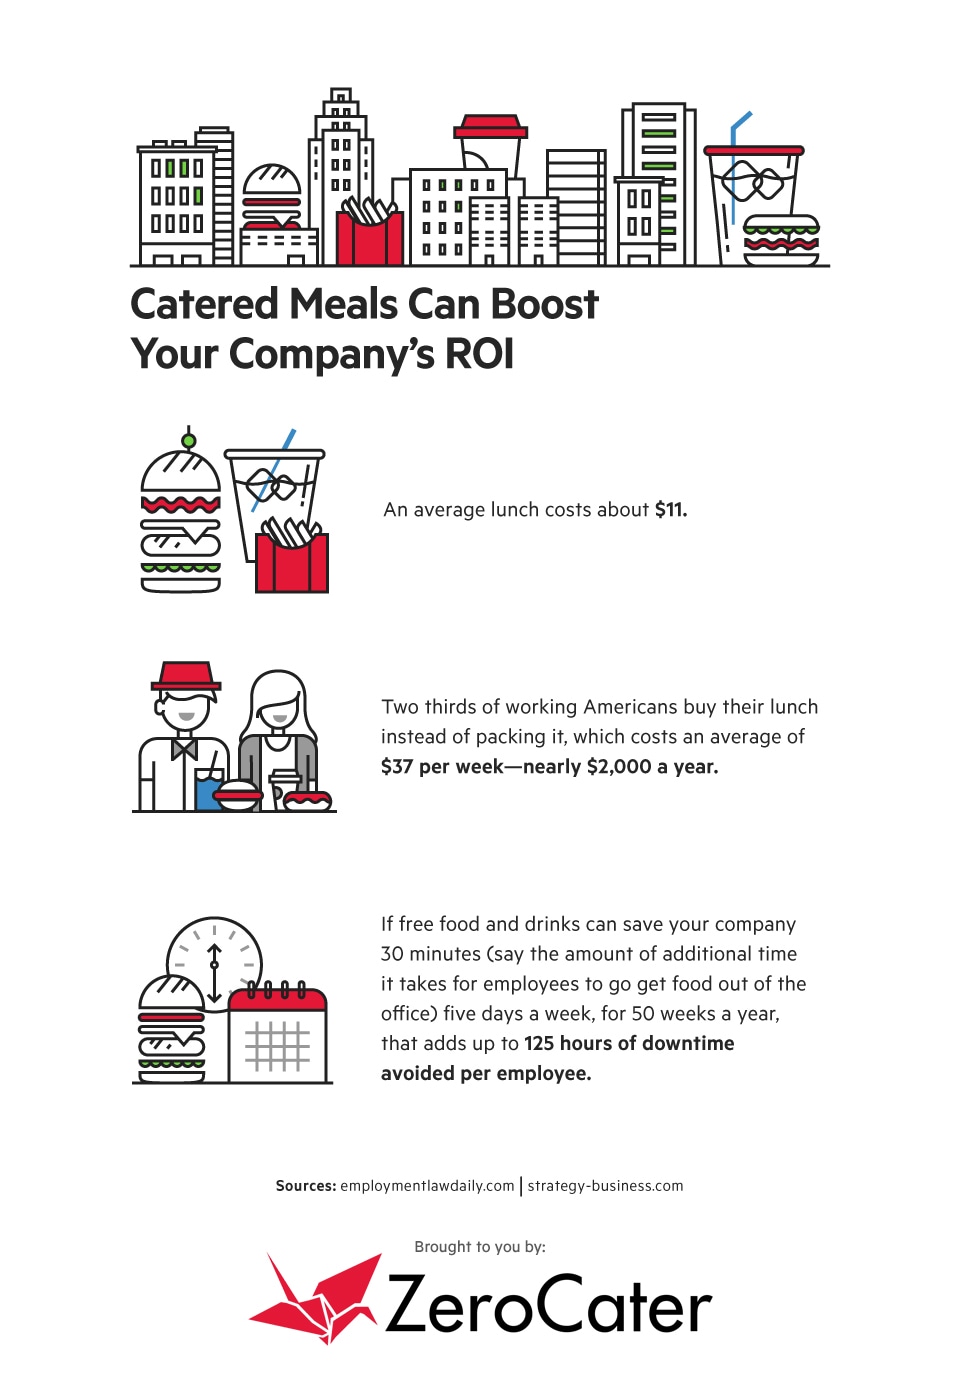 Will Catered Meals Boost Your Company ROI?